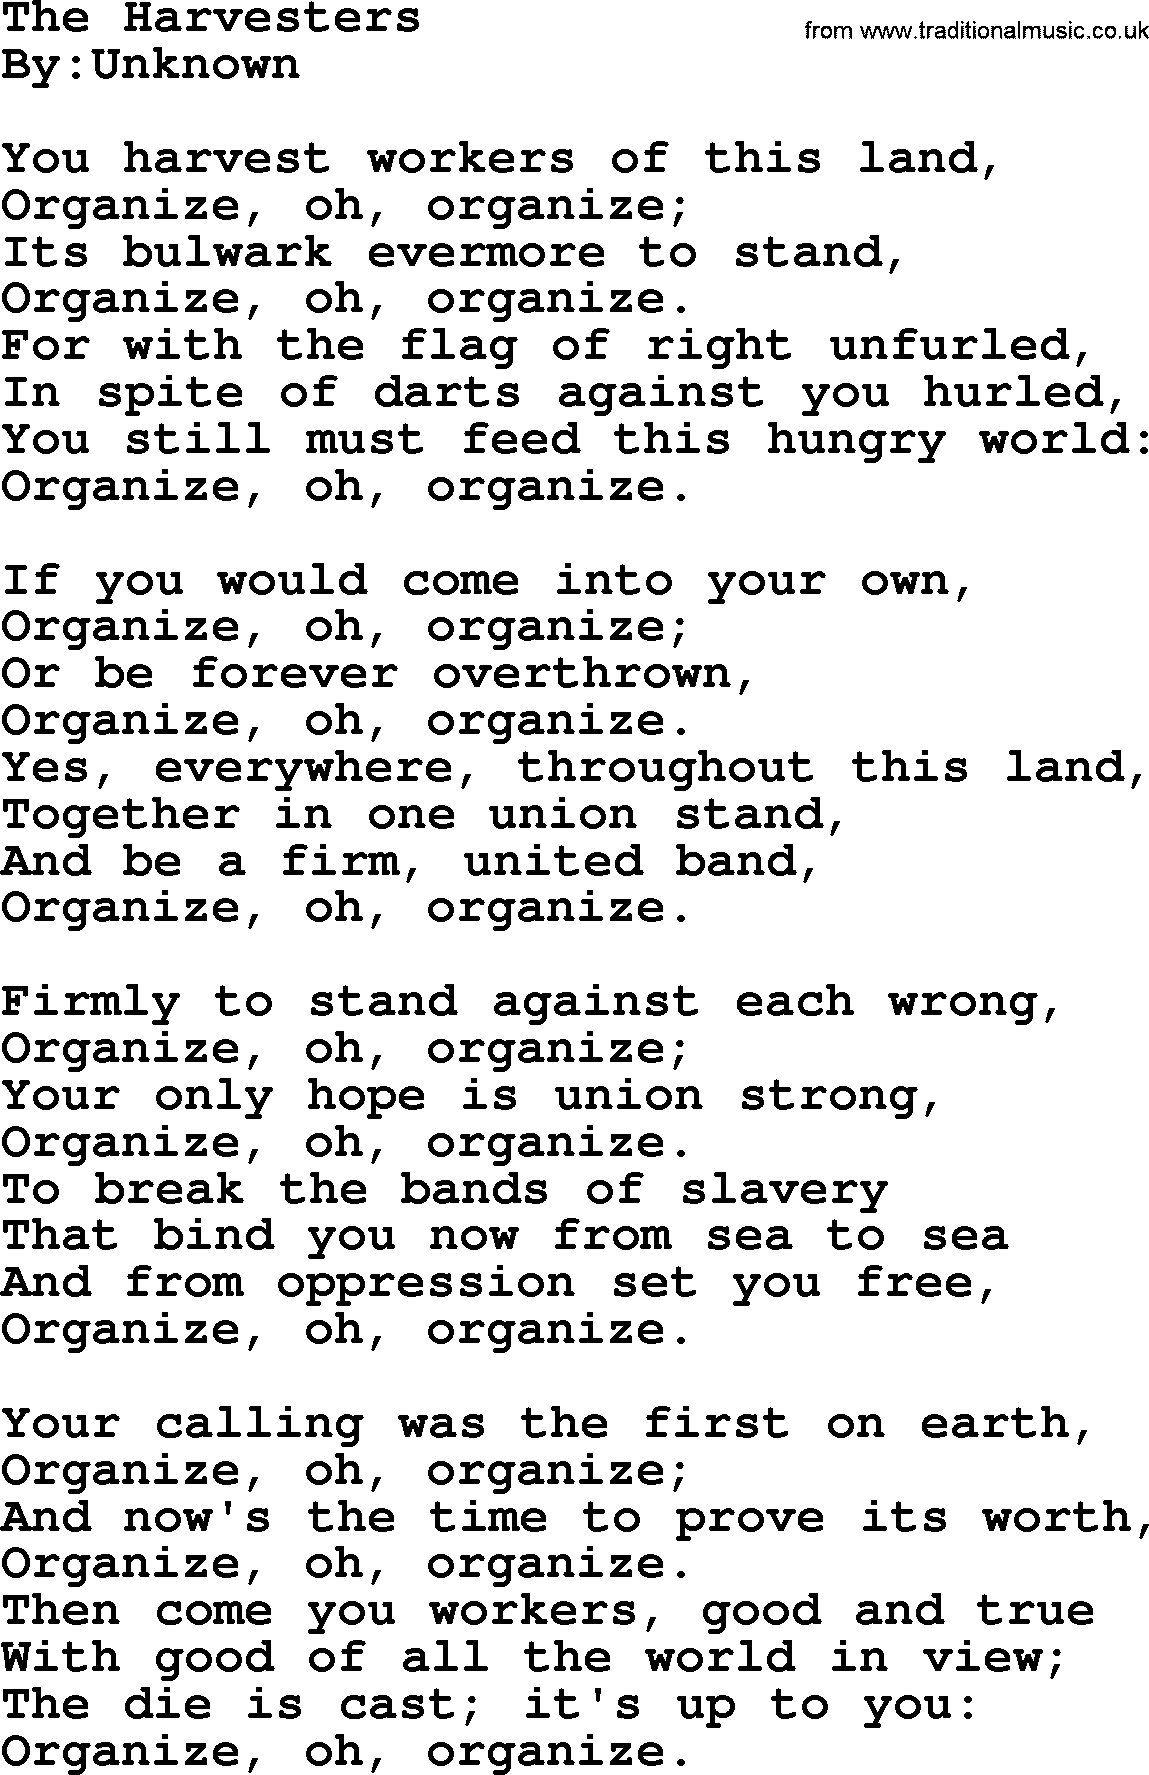 Political, Solidarity, Workers or Union song: The Harvesters, lyrics